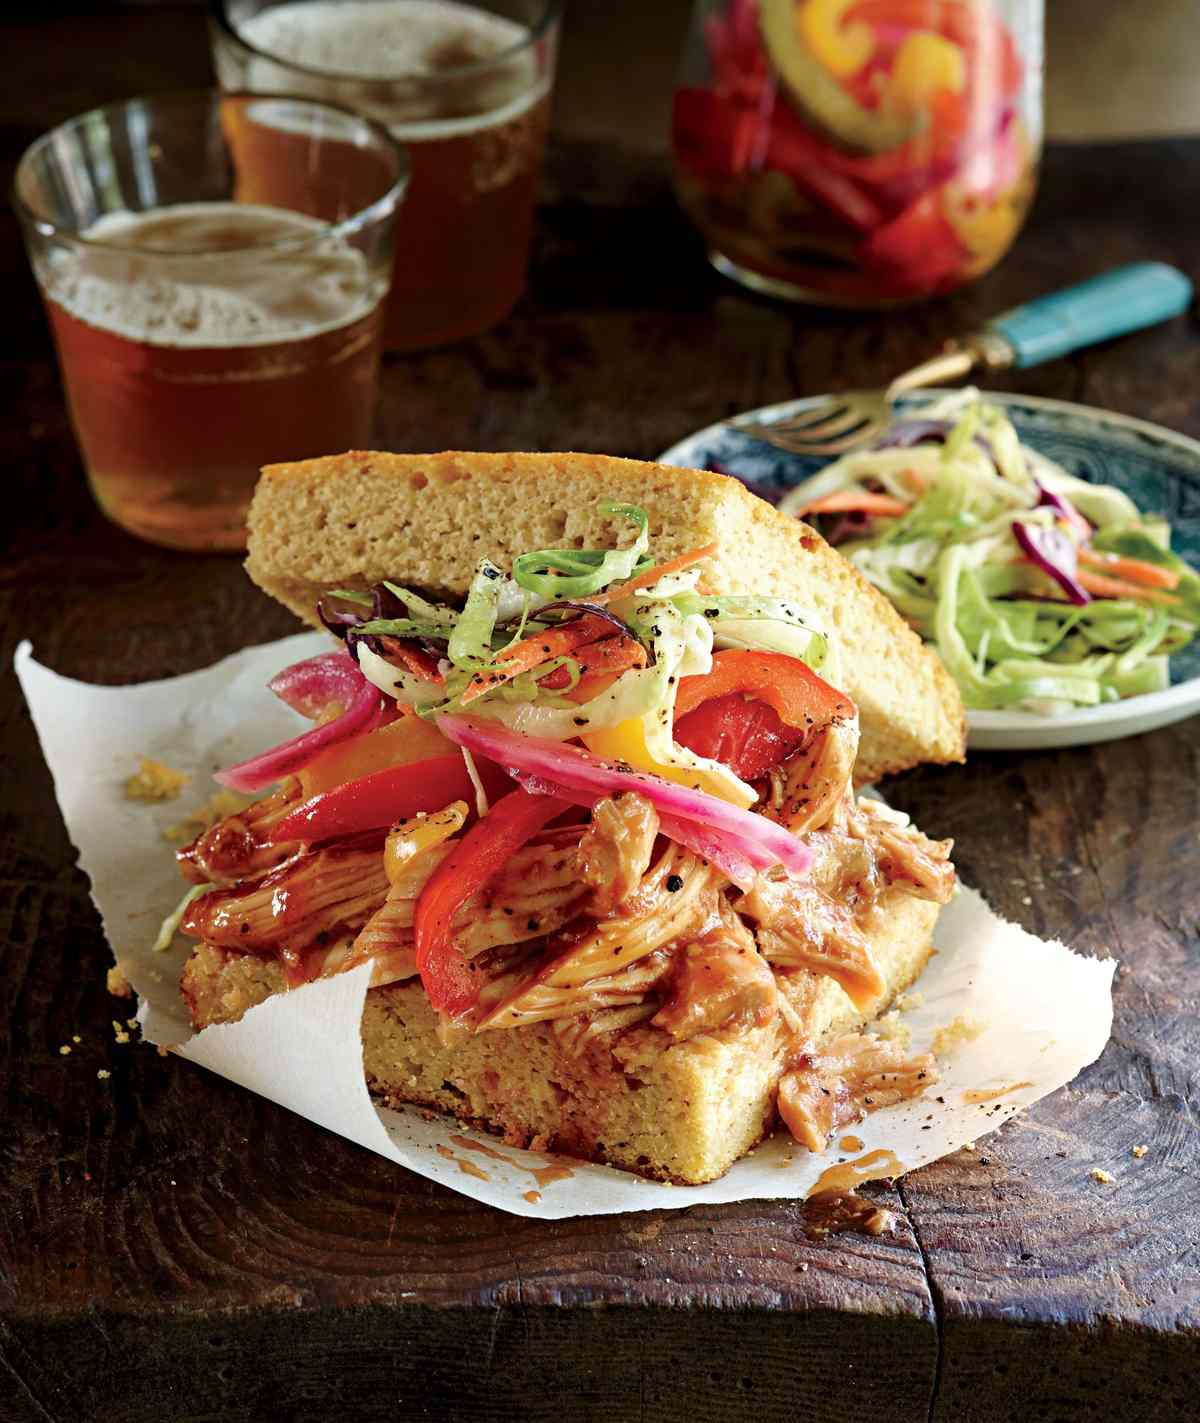 Slow-cooked Barbecued Chicken Sandwiches